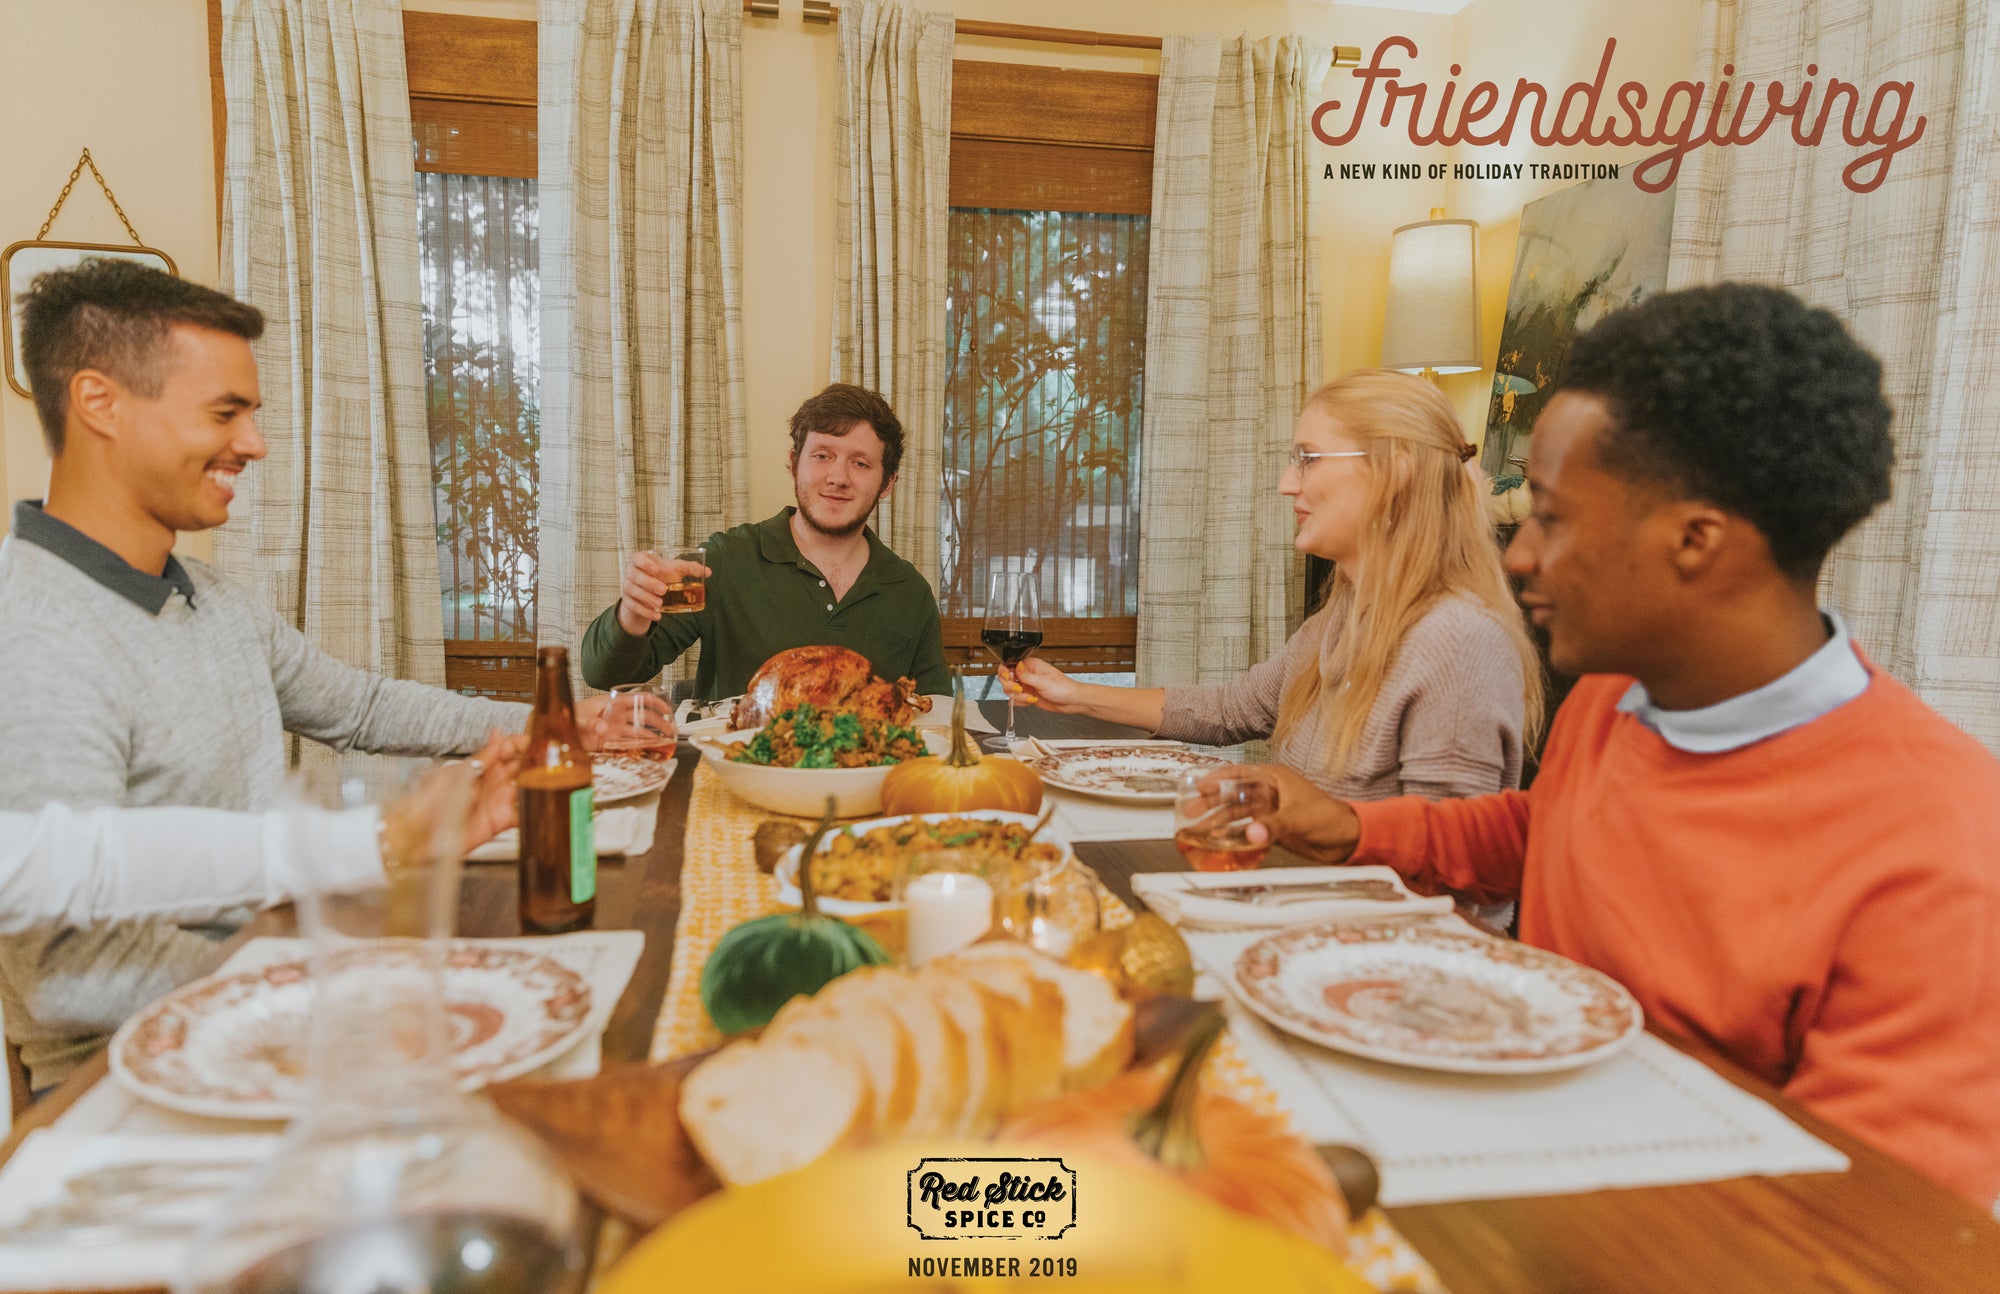 Friendsgiving: A New Holiday Tradition